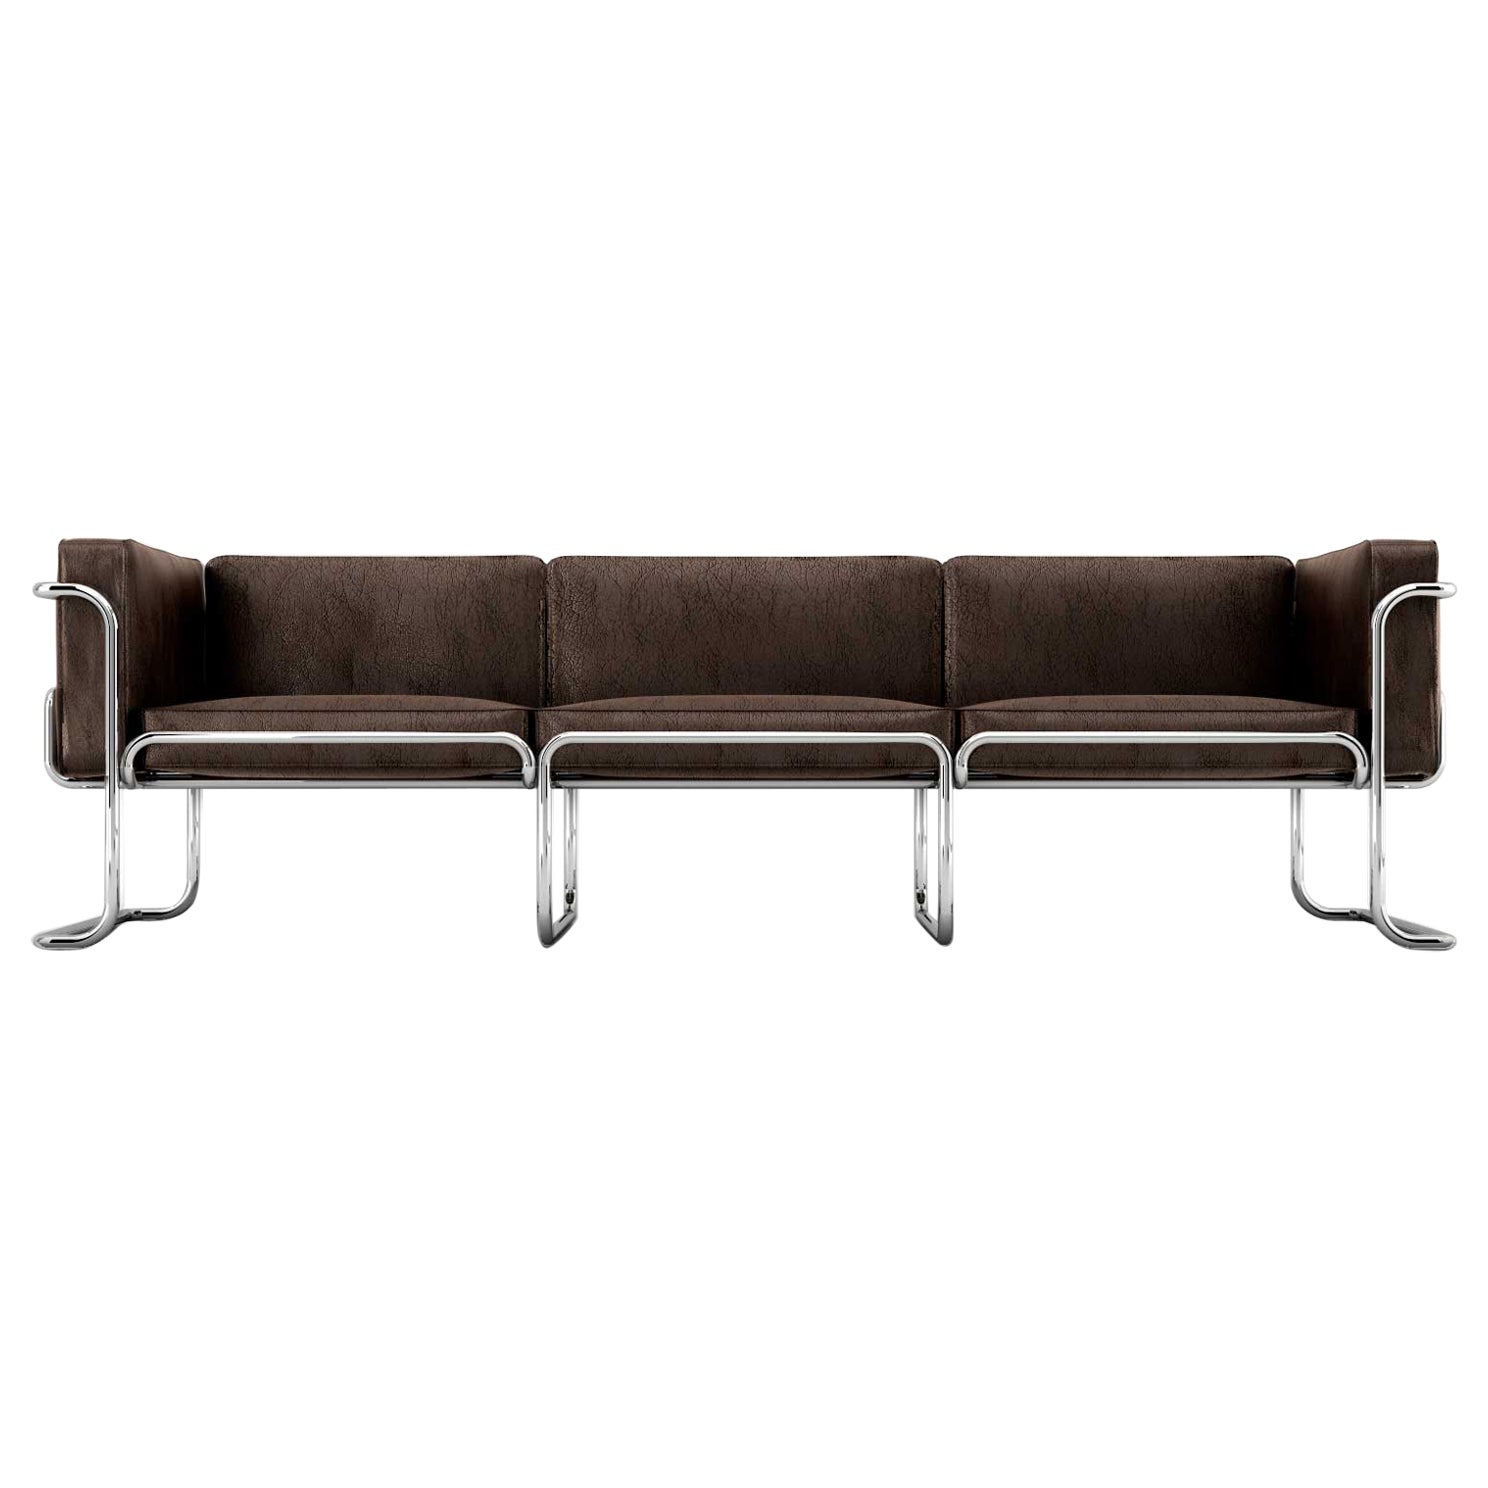 Lotus 3 Seat Sofa - Modern Brown Leather Sofa with Stainless Steel Legs